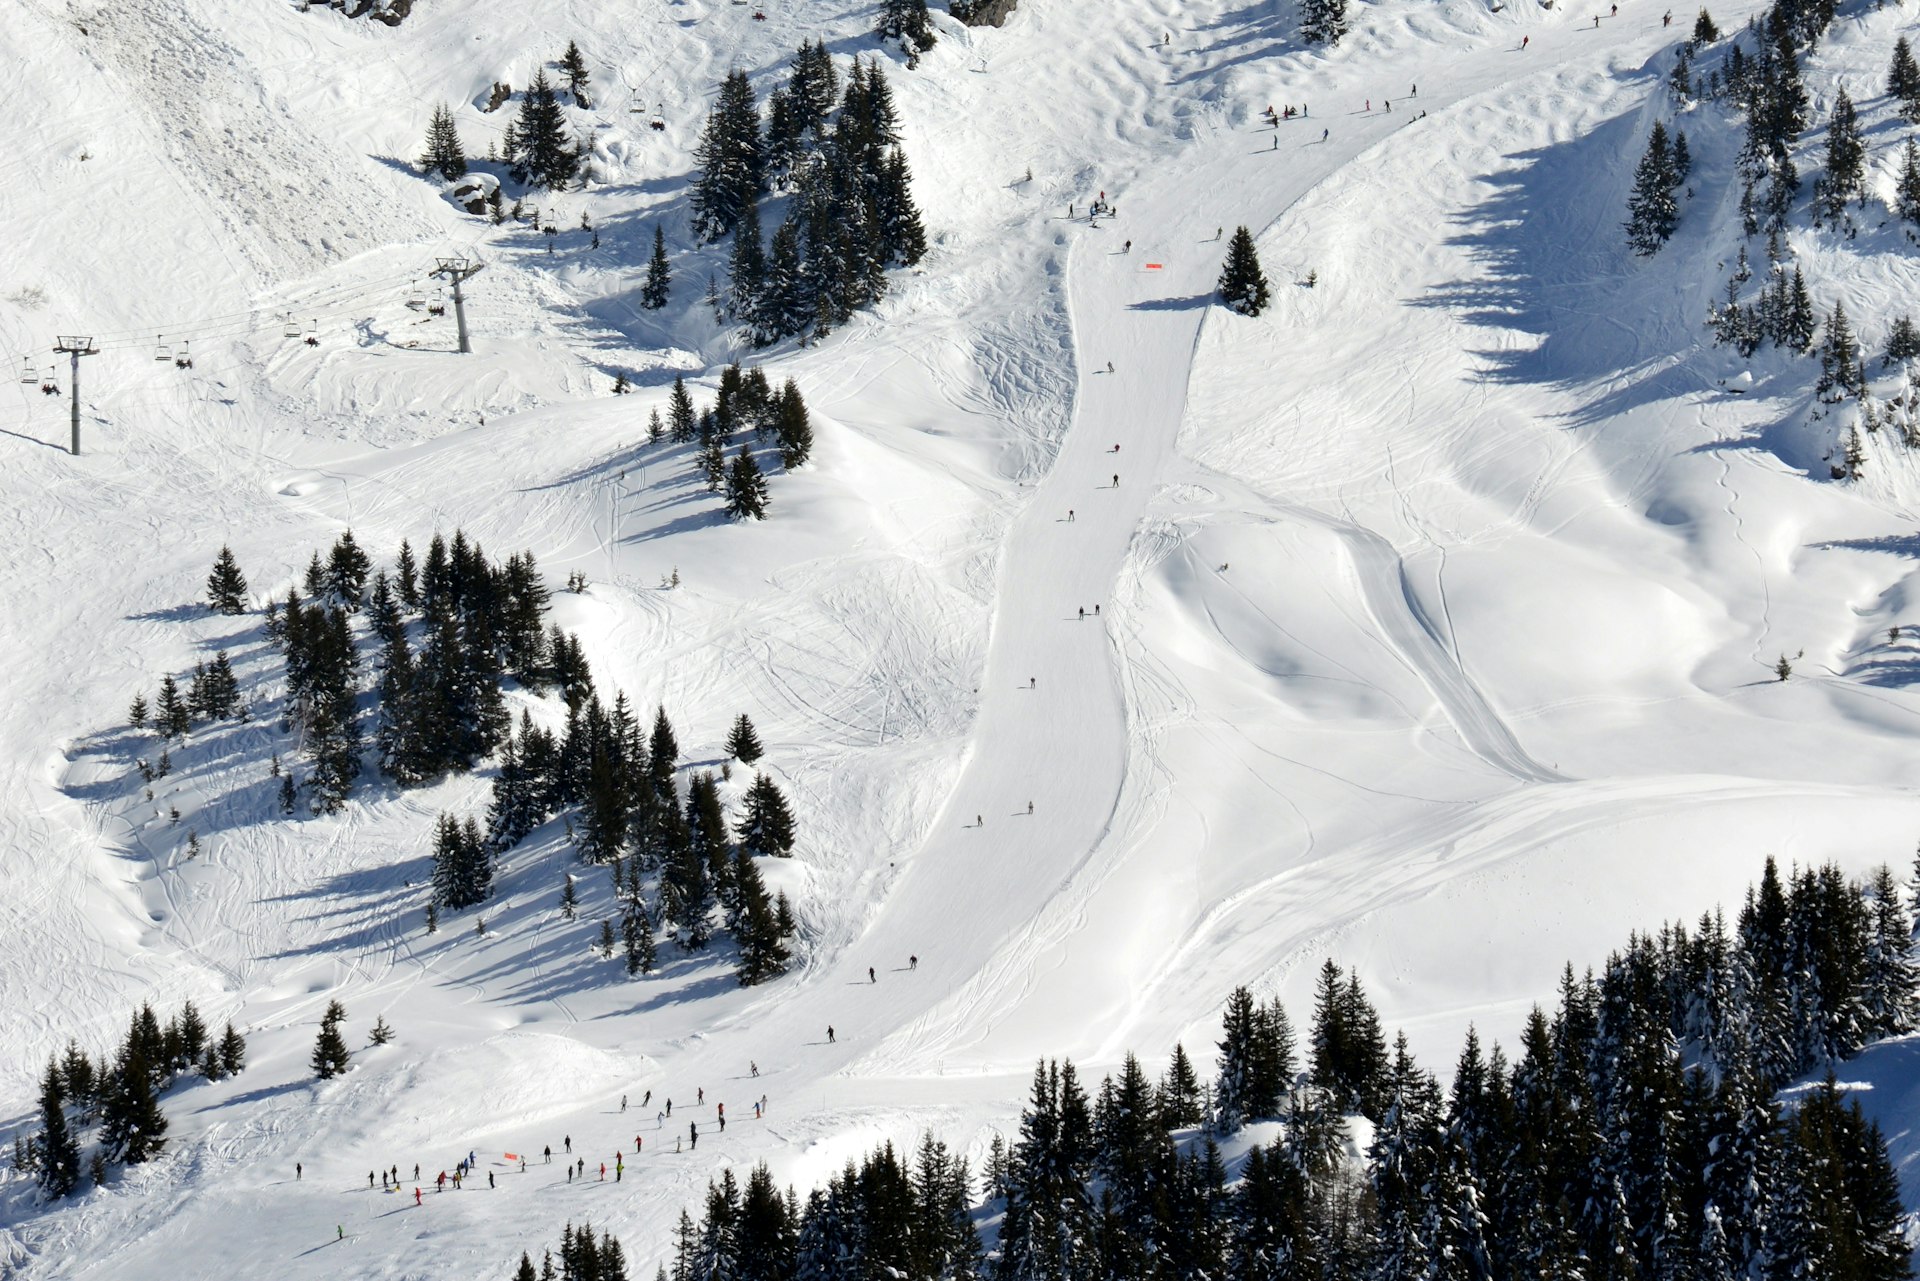 An aerial view of people going down an easy ski run in Morzine-Avoriaz, France